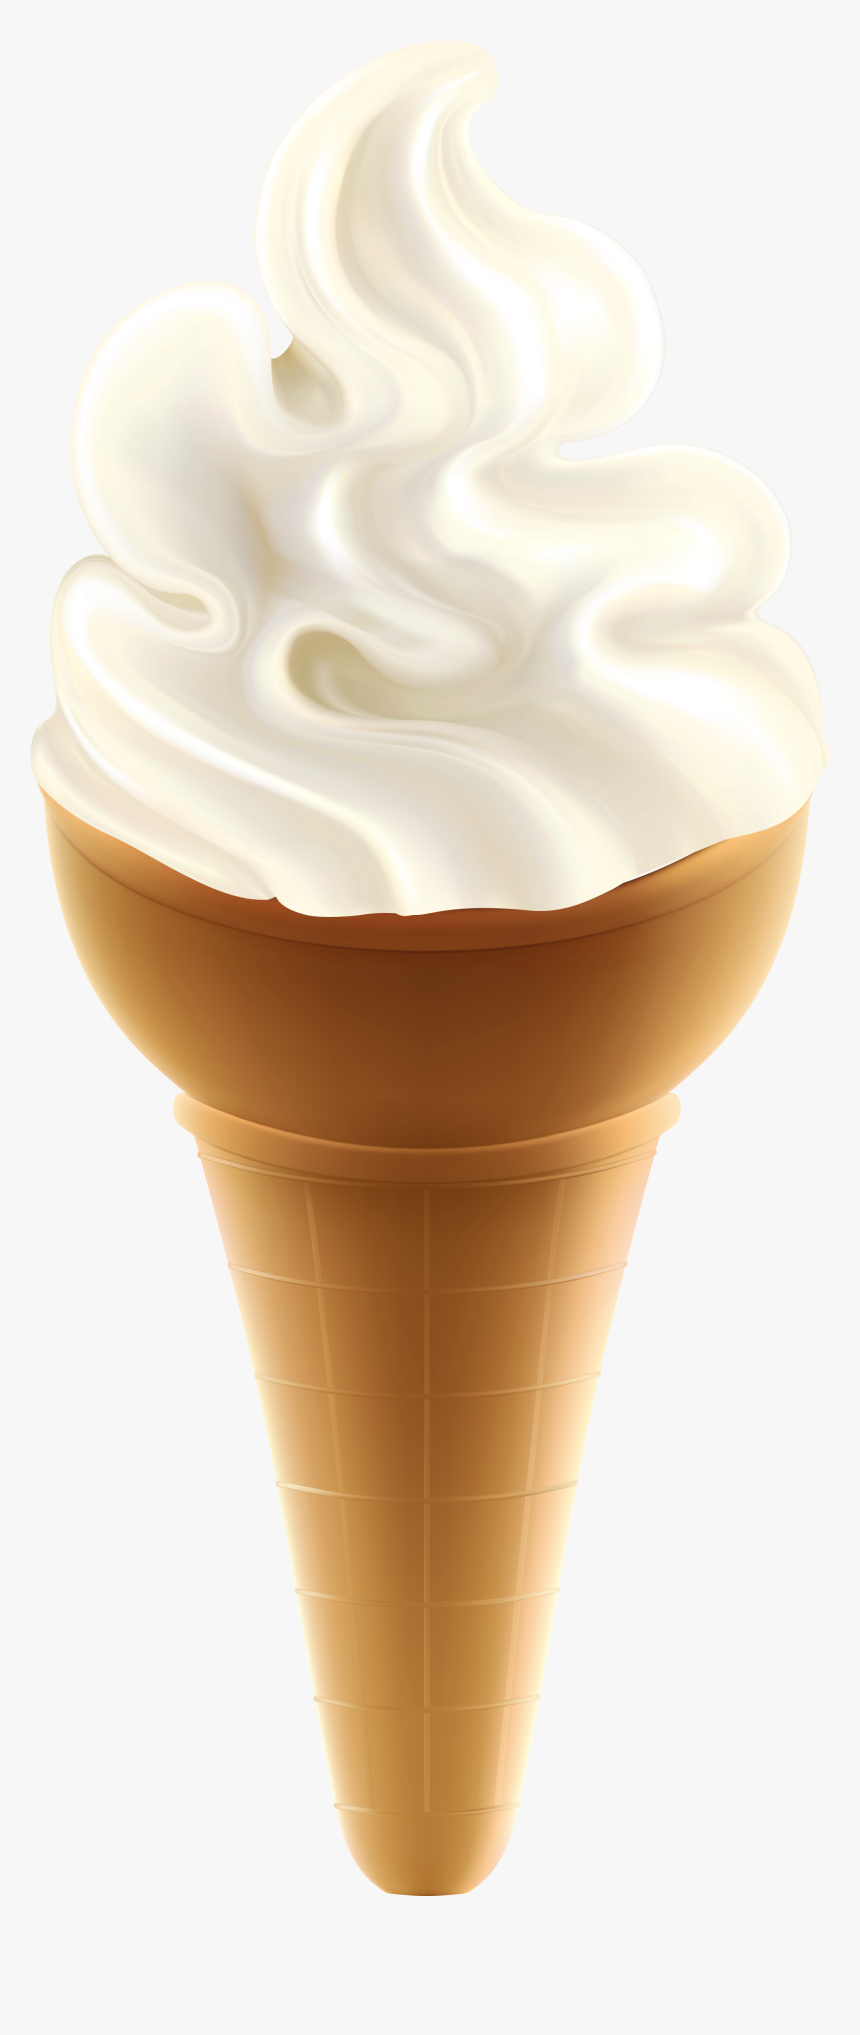 Transparent Ice Cream Cone Picture - Ice Cream Cone Transparent Background, HD Png Download, Free Download